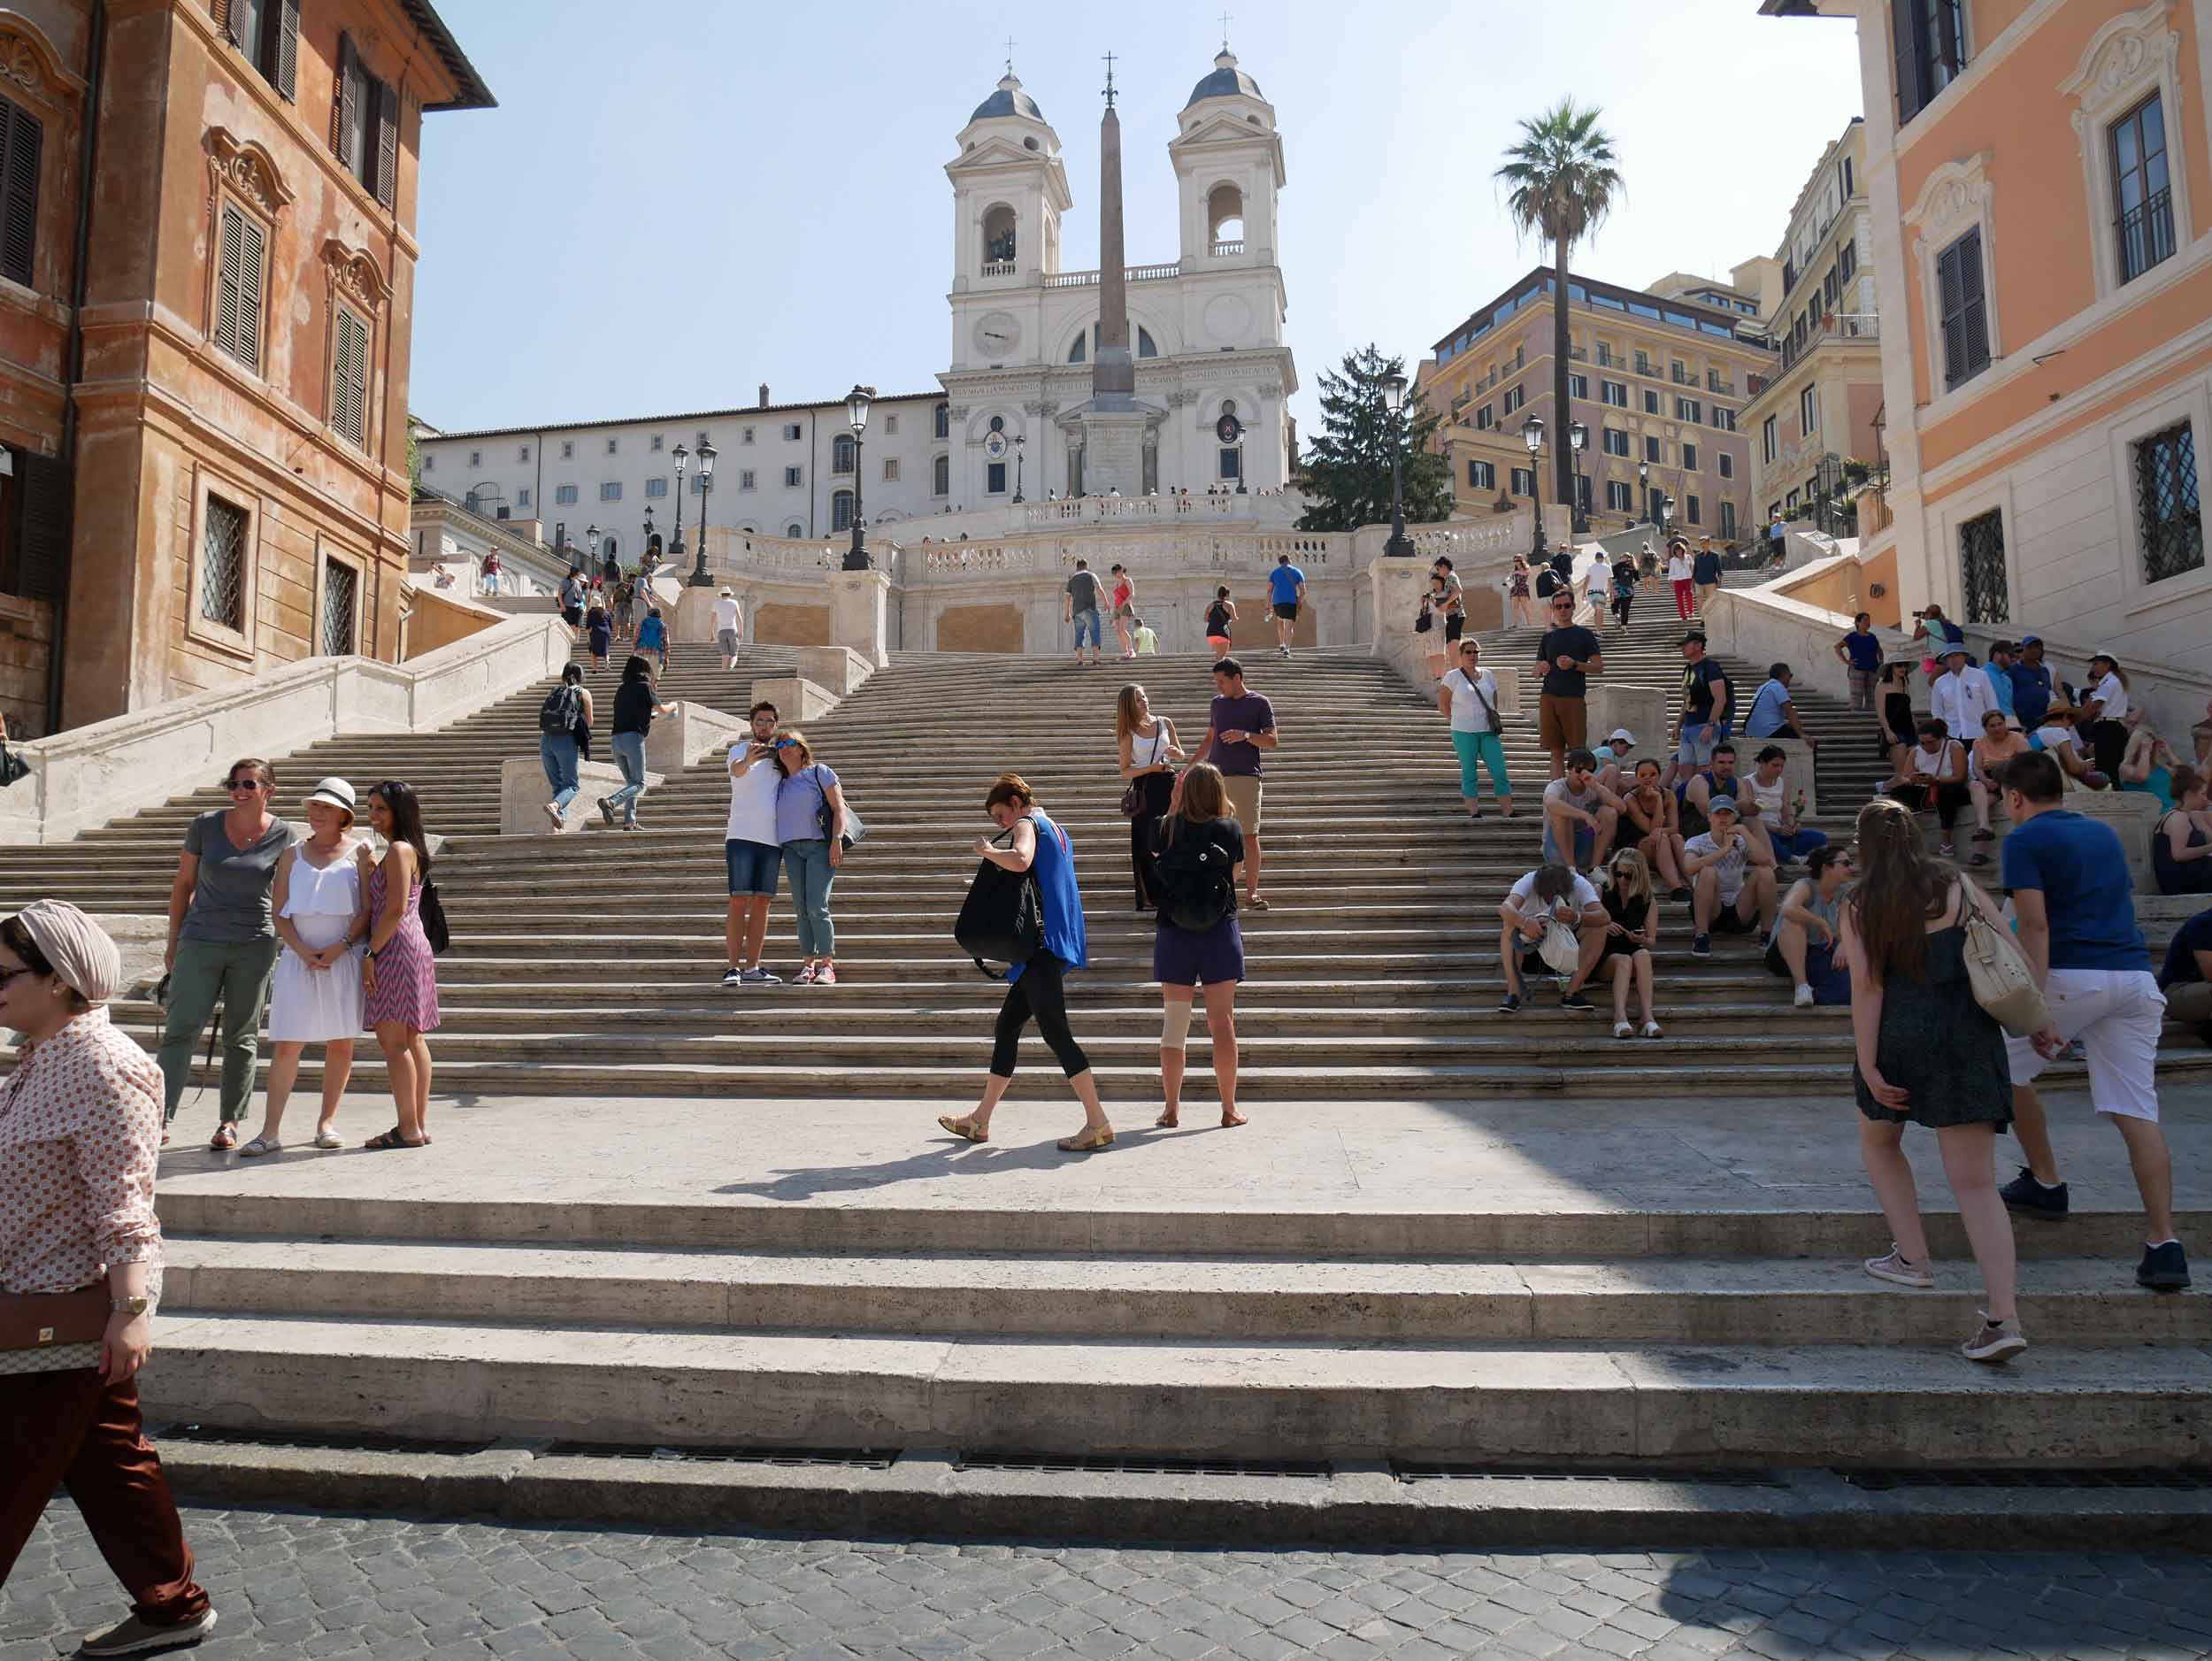  The next morning, we climbed the city's famed Spanish Steps along with many other tourists (July 14).&nbsp; 